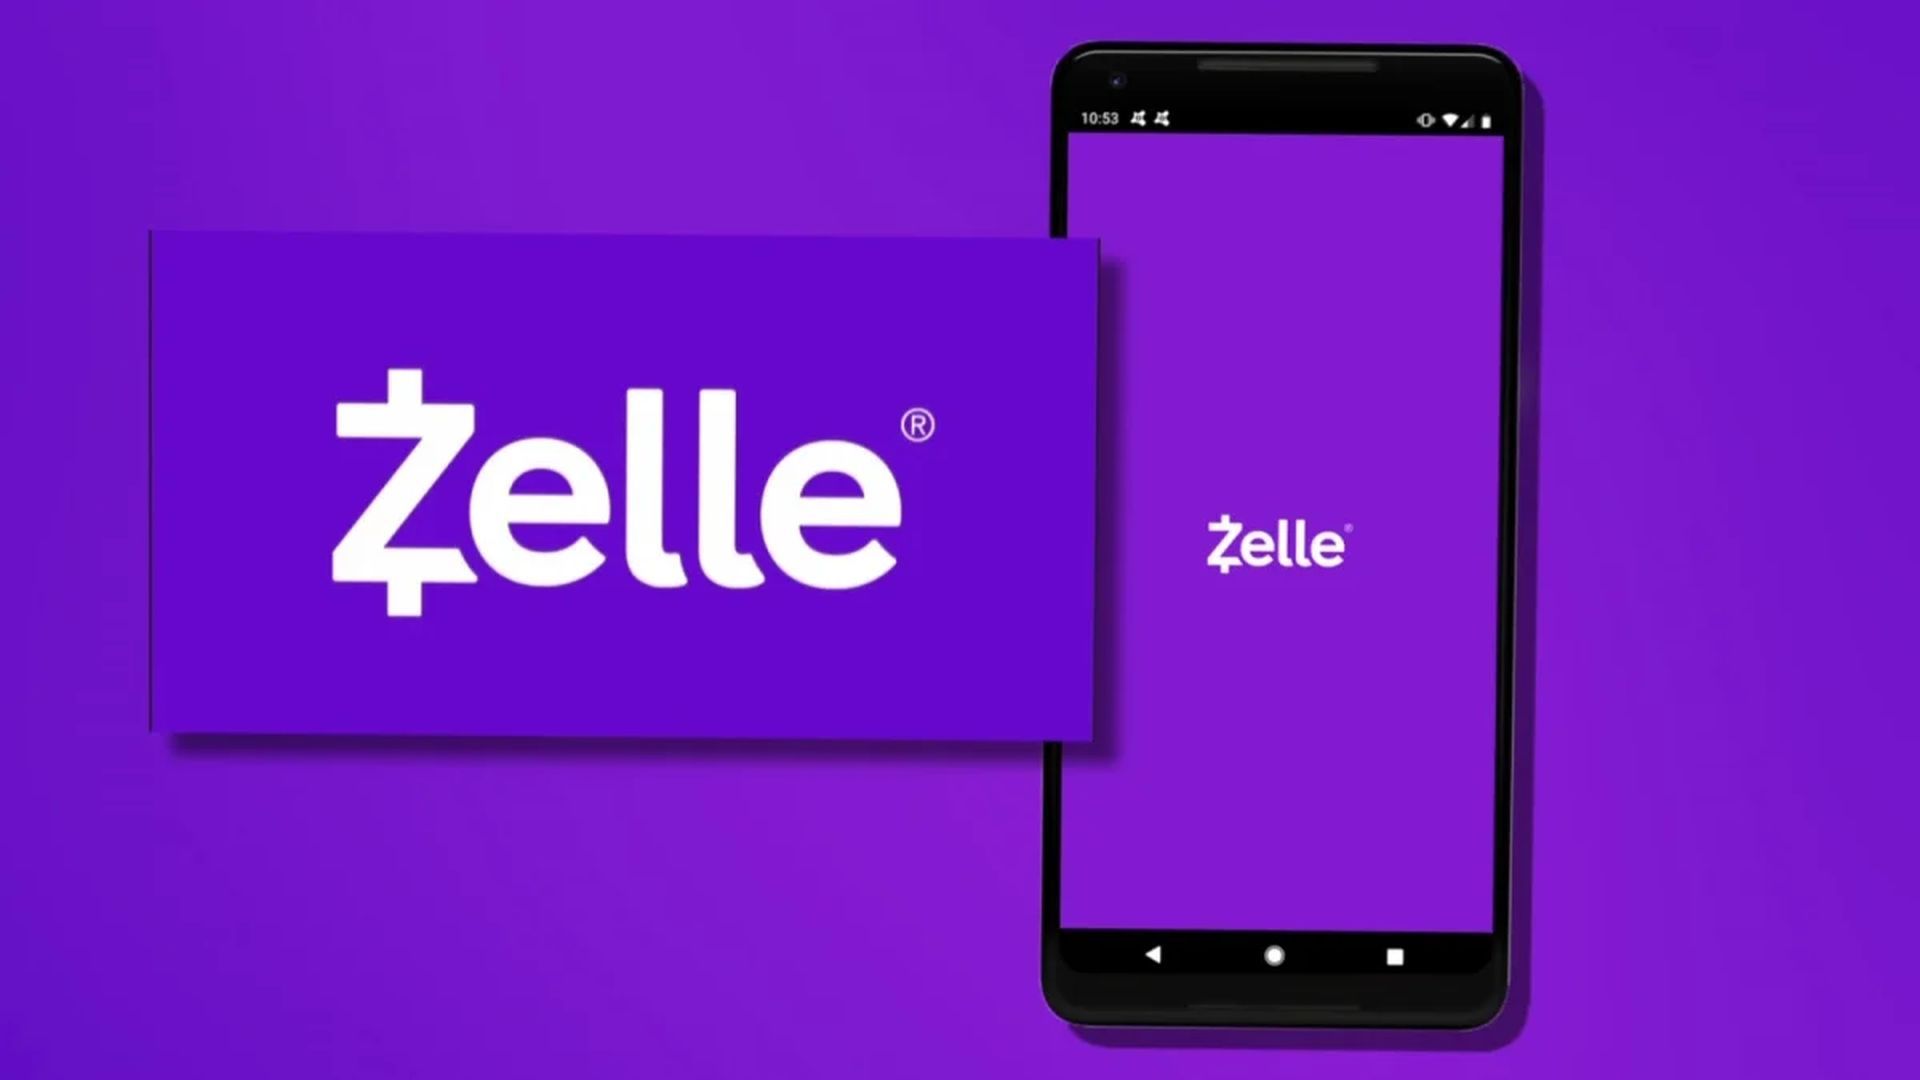 Bank accounts missing money: Bank of America and Zelle issue